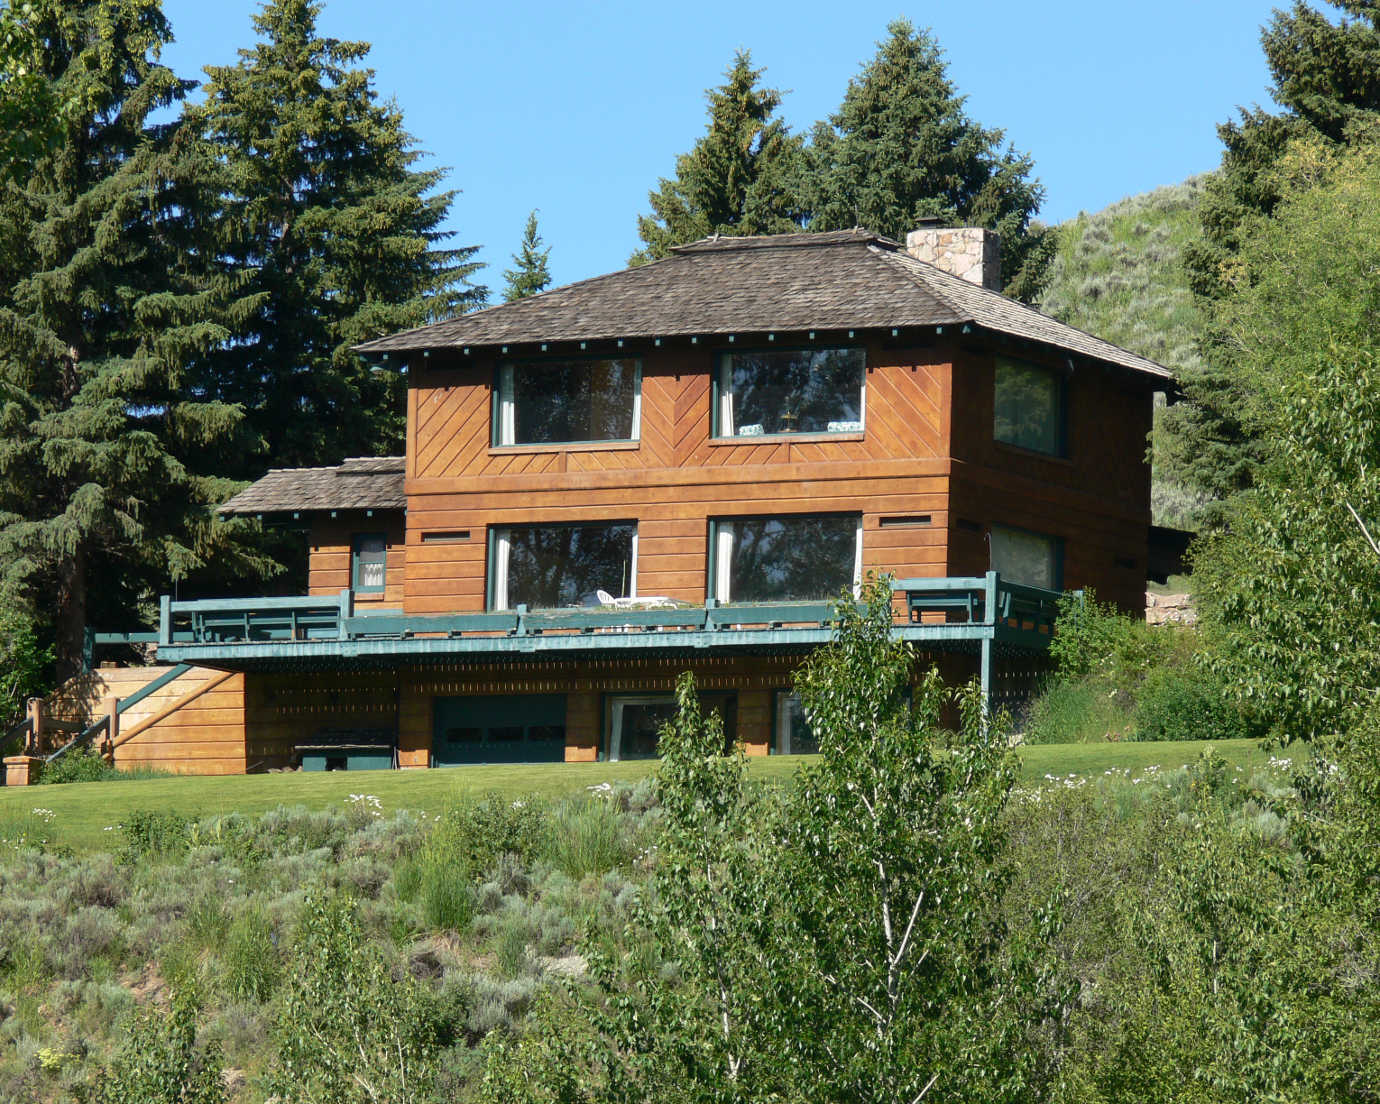 The exterior of Ernest Hemingway's home in Sun Valley, Idaho. Image courtesy of the Community Library.